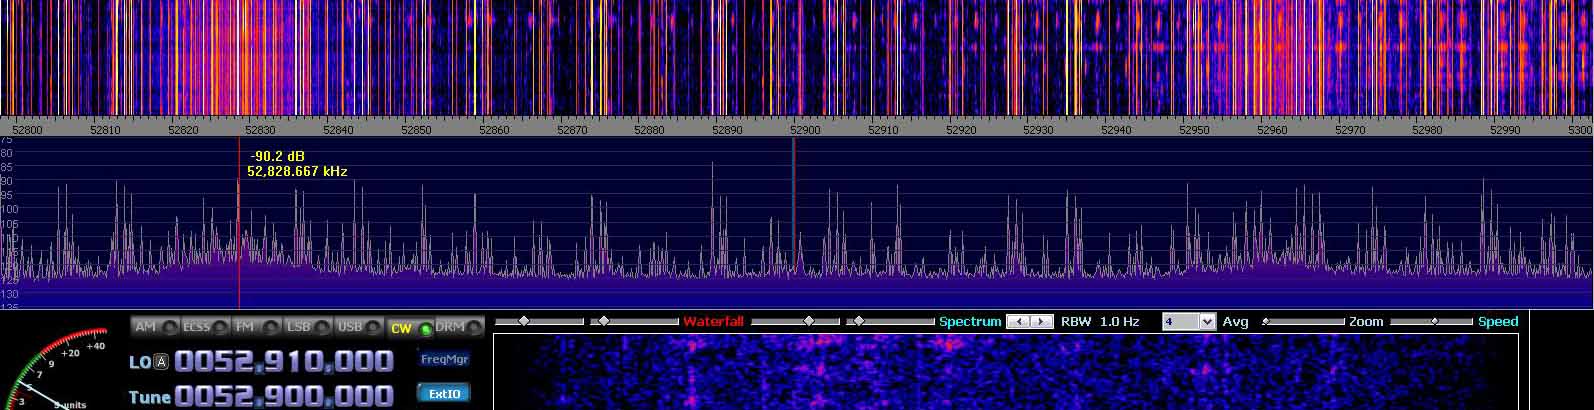 2014-07-04 52.900 MHz +- 100 kHz - Strong Es - 4-el dipole array with ends to St P - (c) OH7HJ.JPG